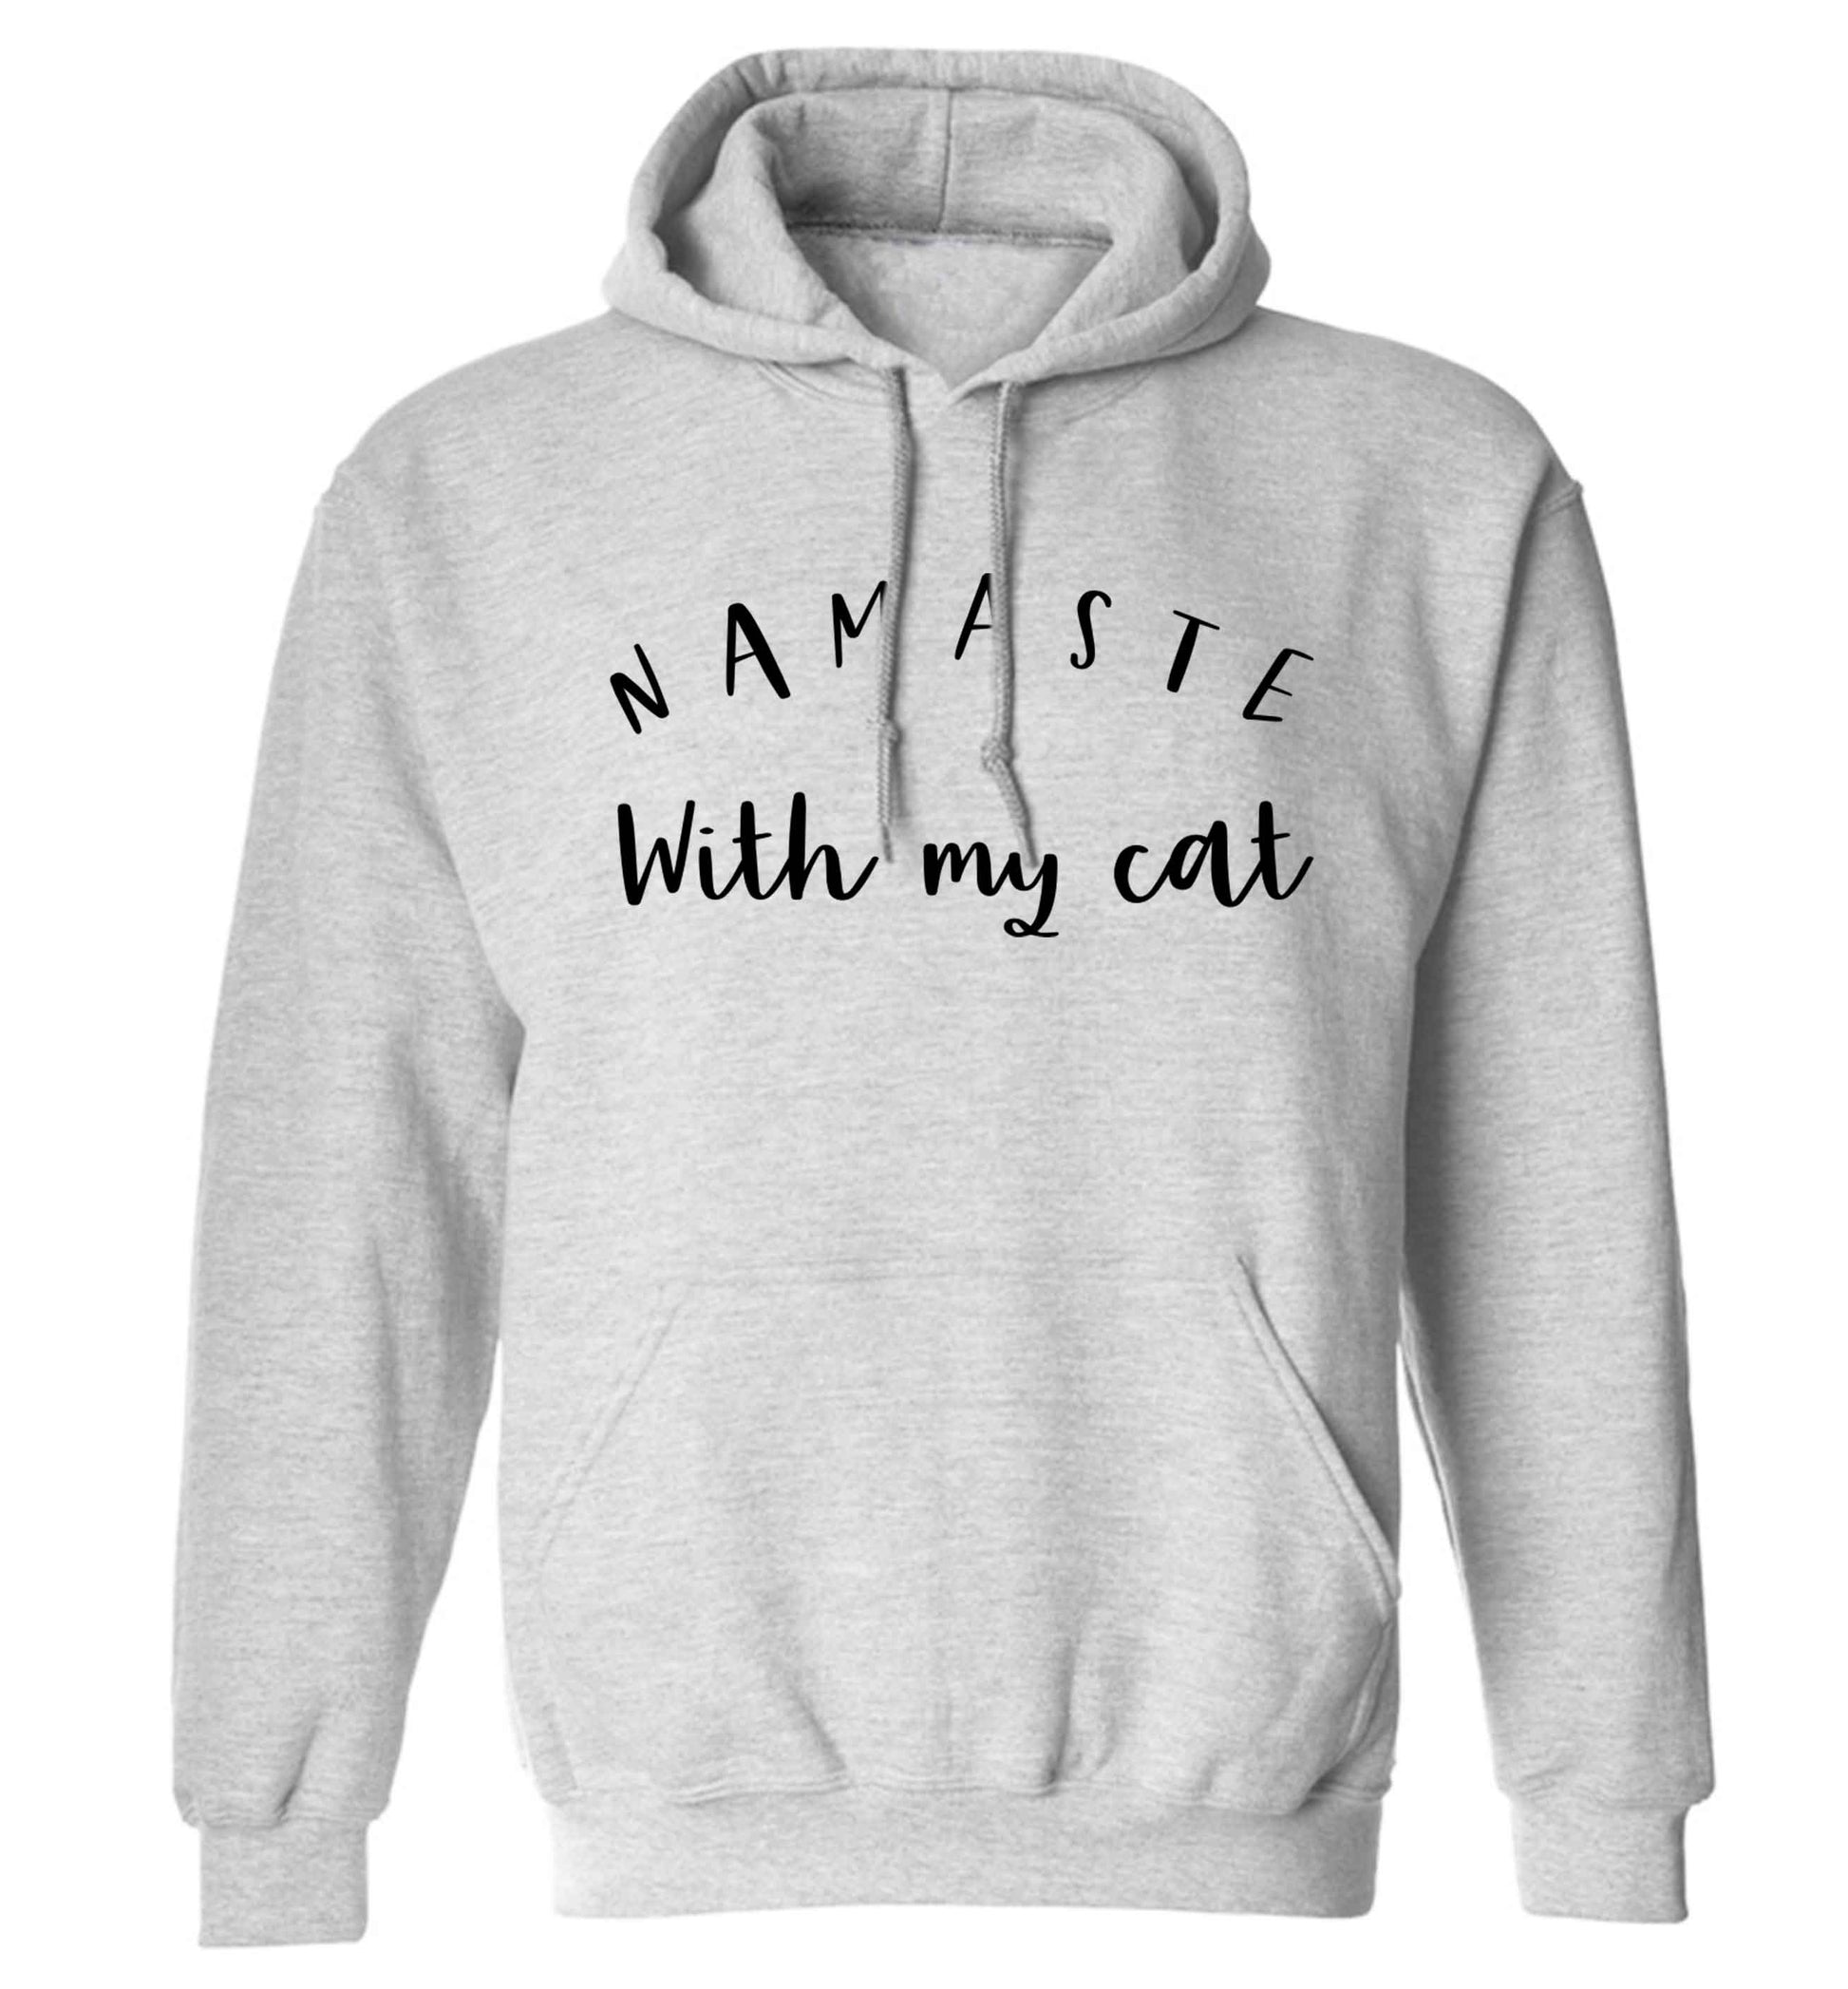 Namaste with my cat adults unisex grey hoodie 2XL